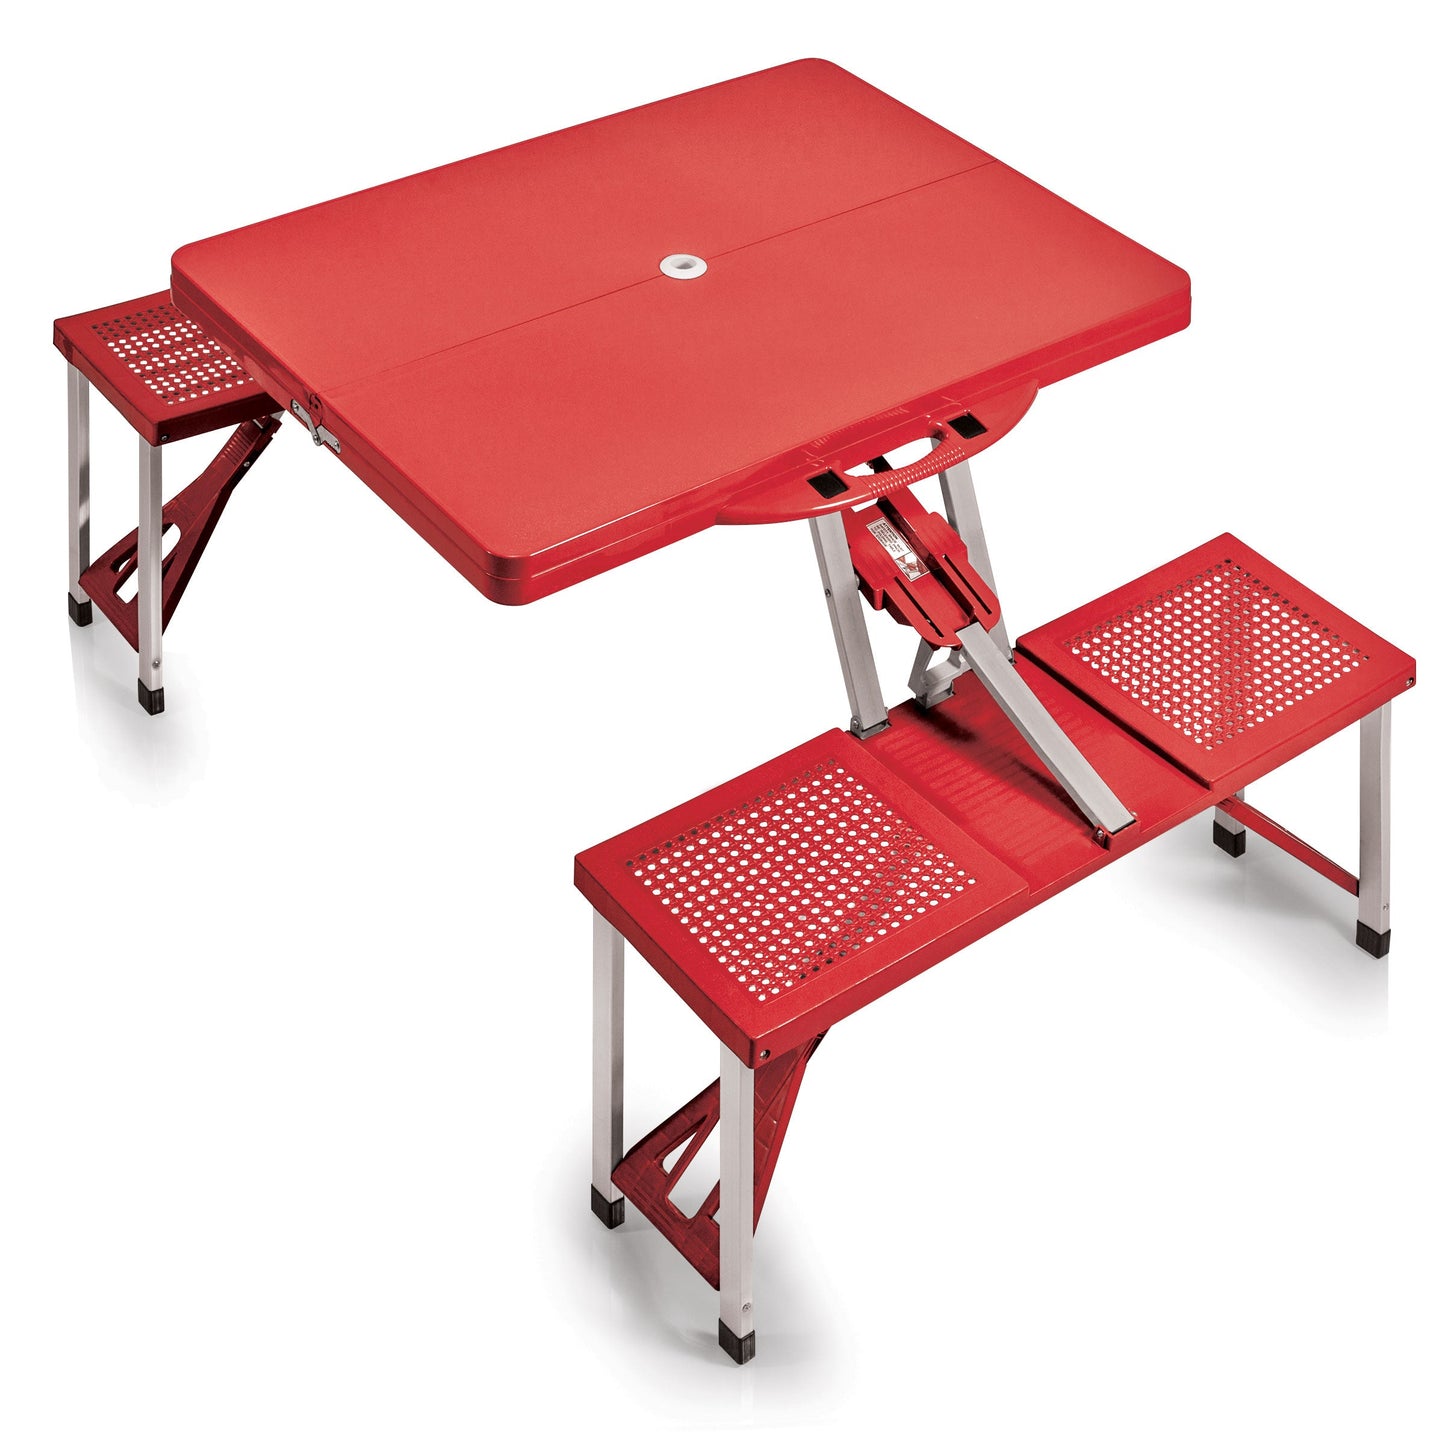 Picnic Table Portable Folding Table with Seats - Red